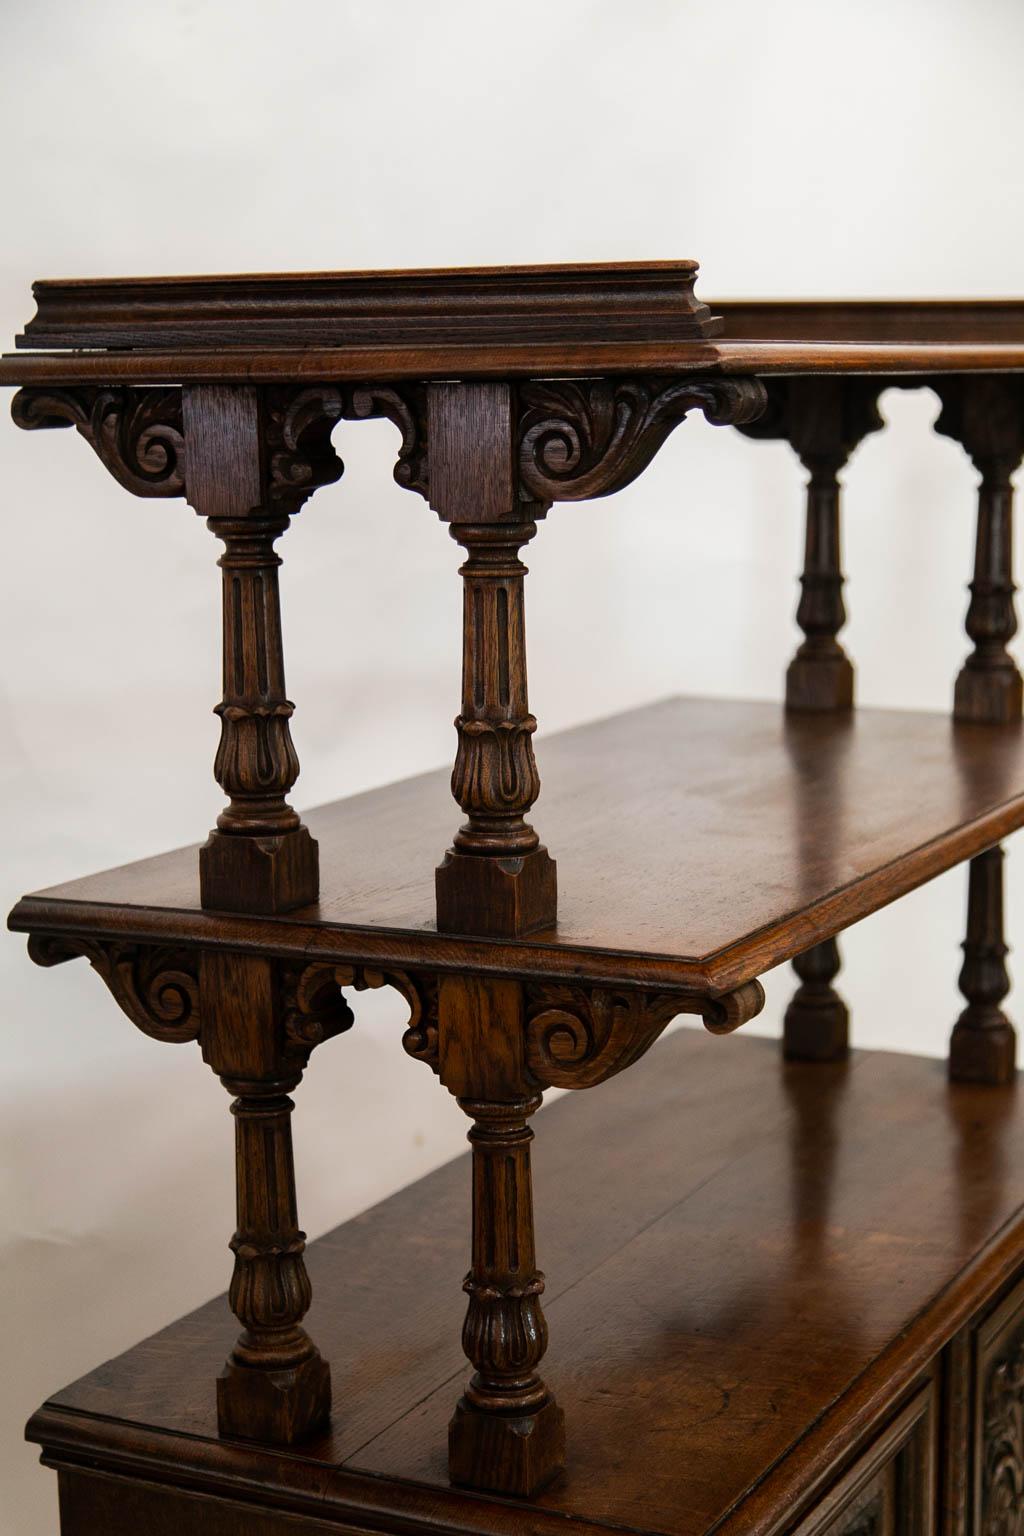 The top shelf of this three tiered server has a shaped molded gallery. The upper and middle shelf are supported by double fluted columns braced by carved arabesques. The lower doors have panels carved in high relief with fruit and floral arabesques.